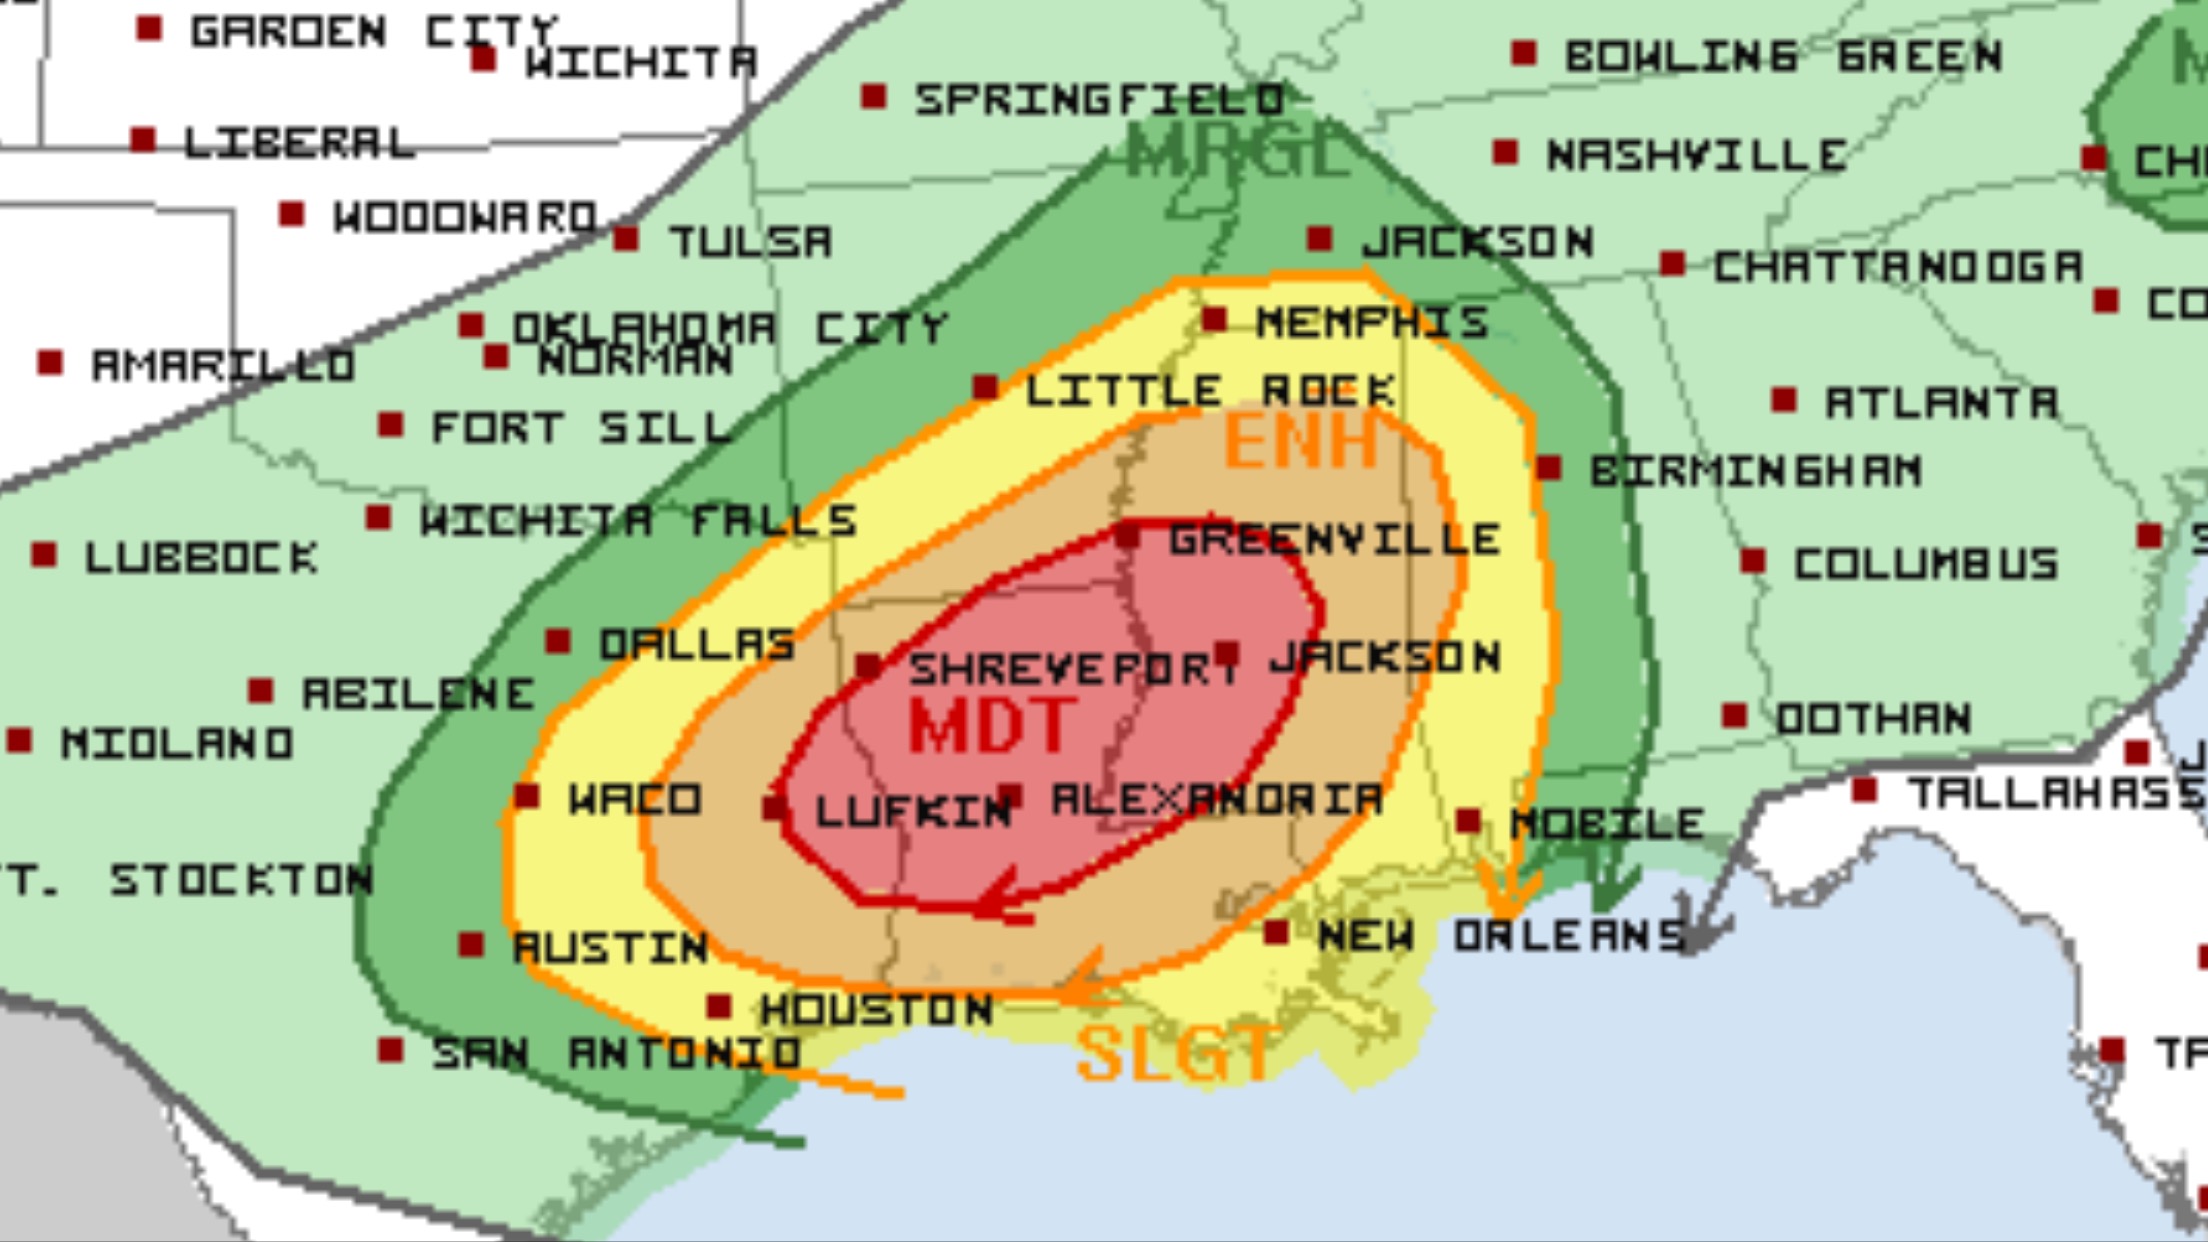 Tornado Outbreak Possible for Southern Central United States - Higgins Storm Chasing